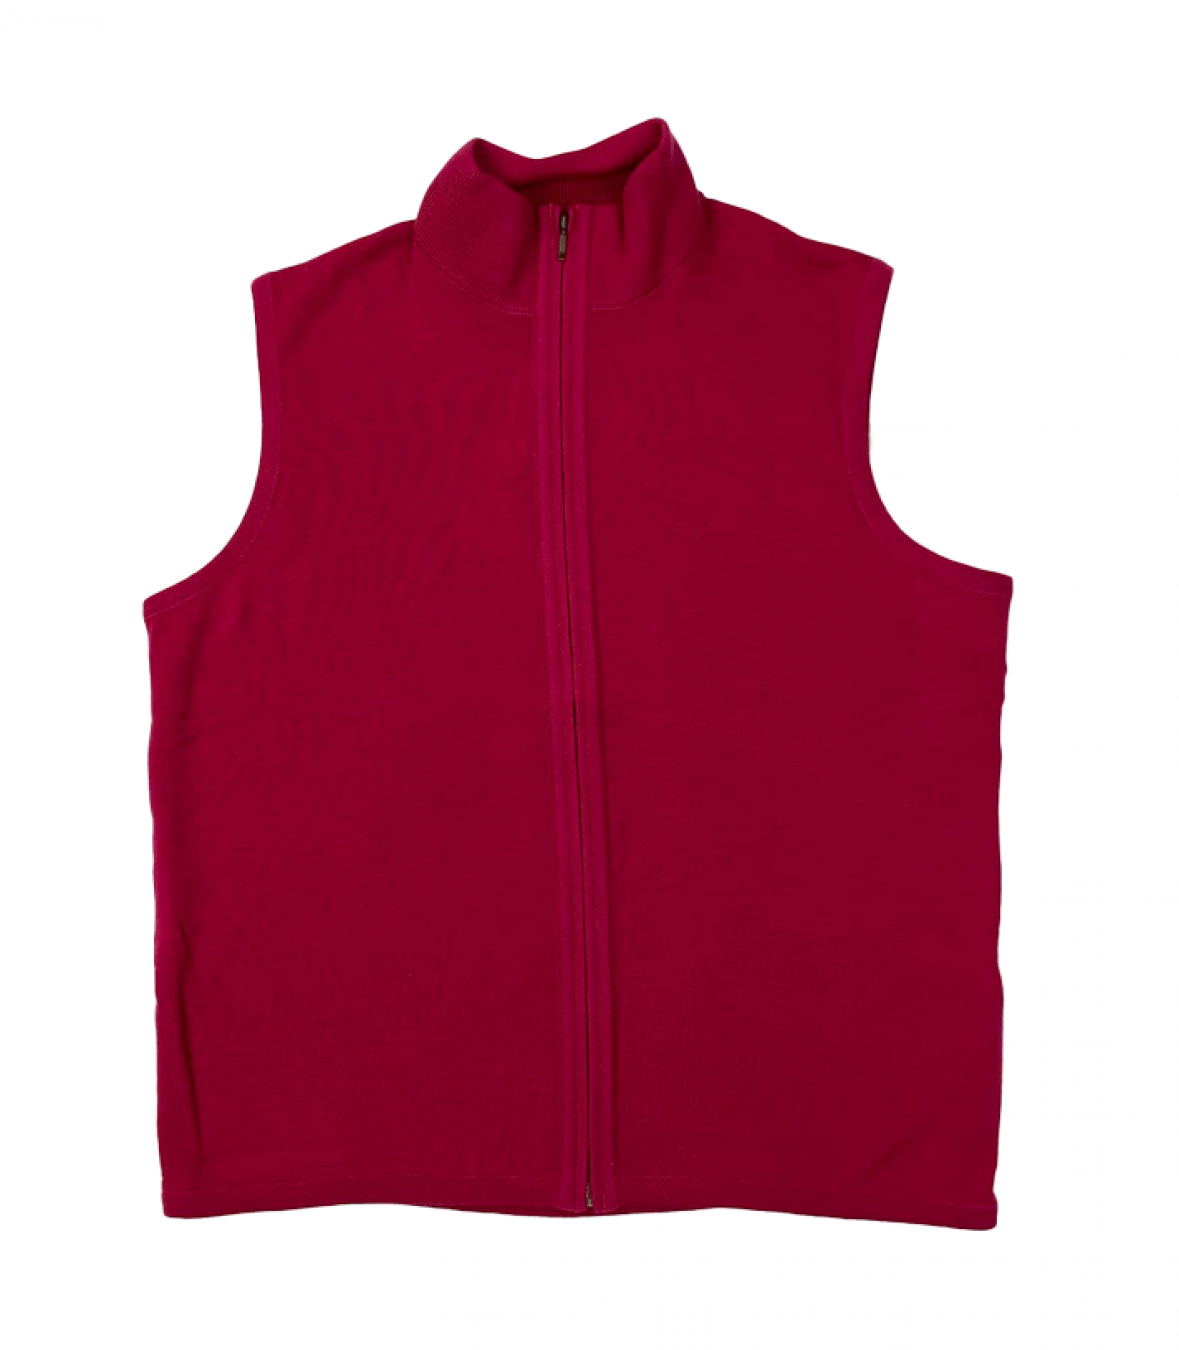 Wool Full Zip Vest Sweater - Additional Colors Made in USA | RAMBLERS WAY